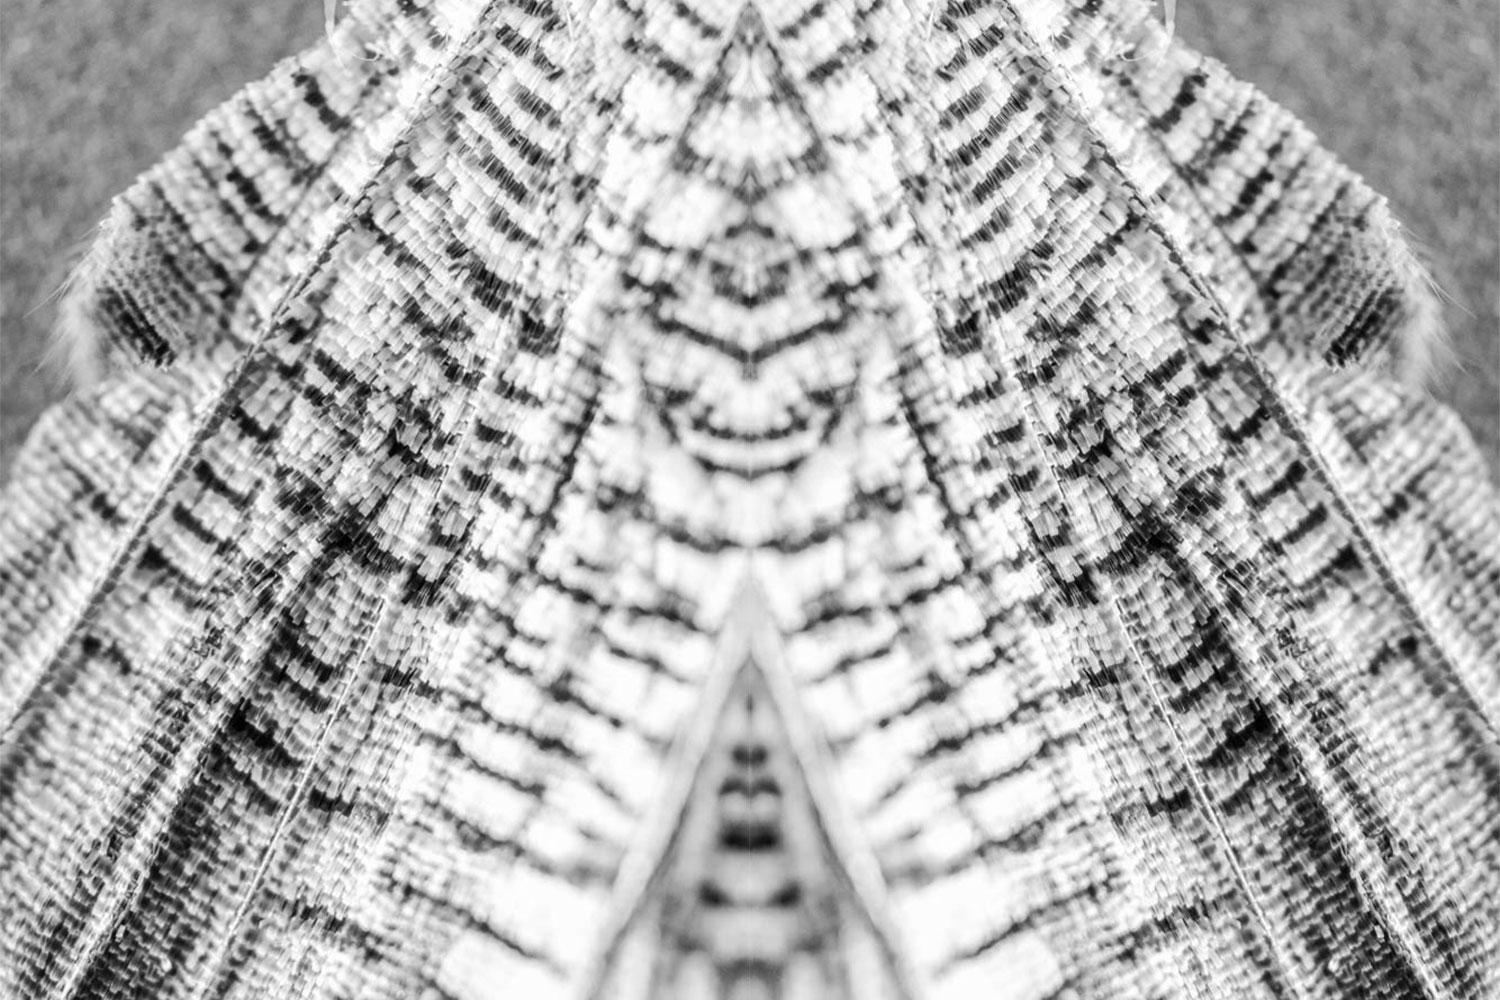 Butterfly wings art work in black and white